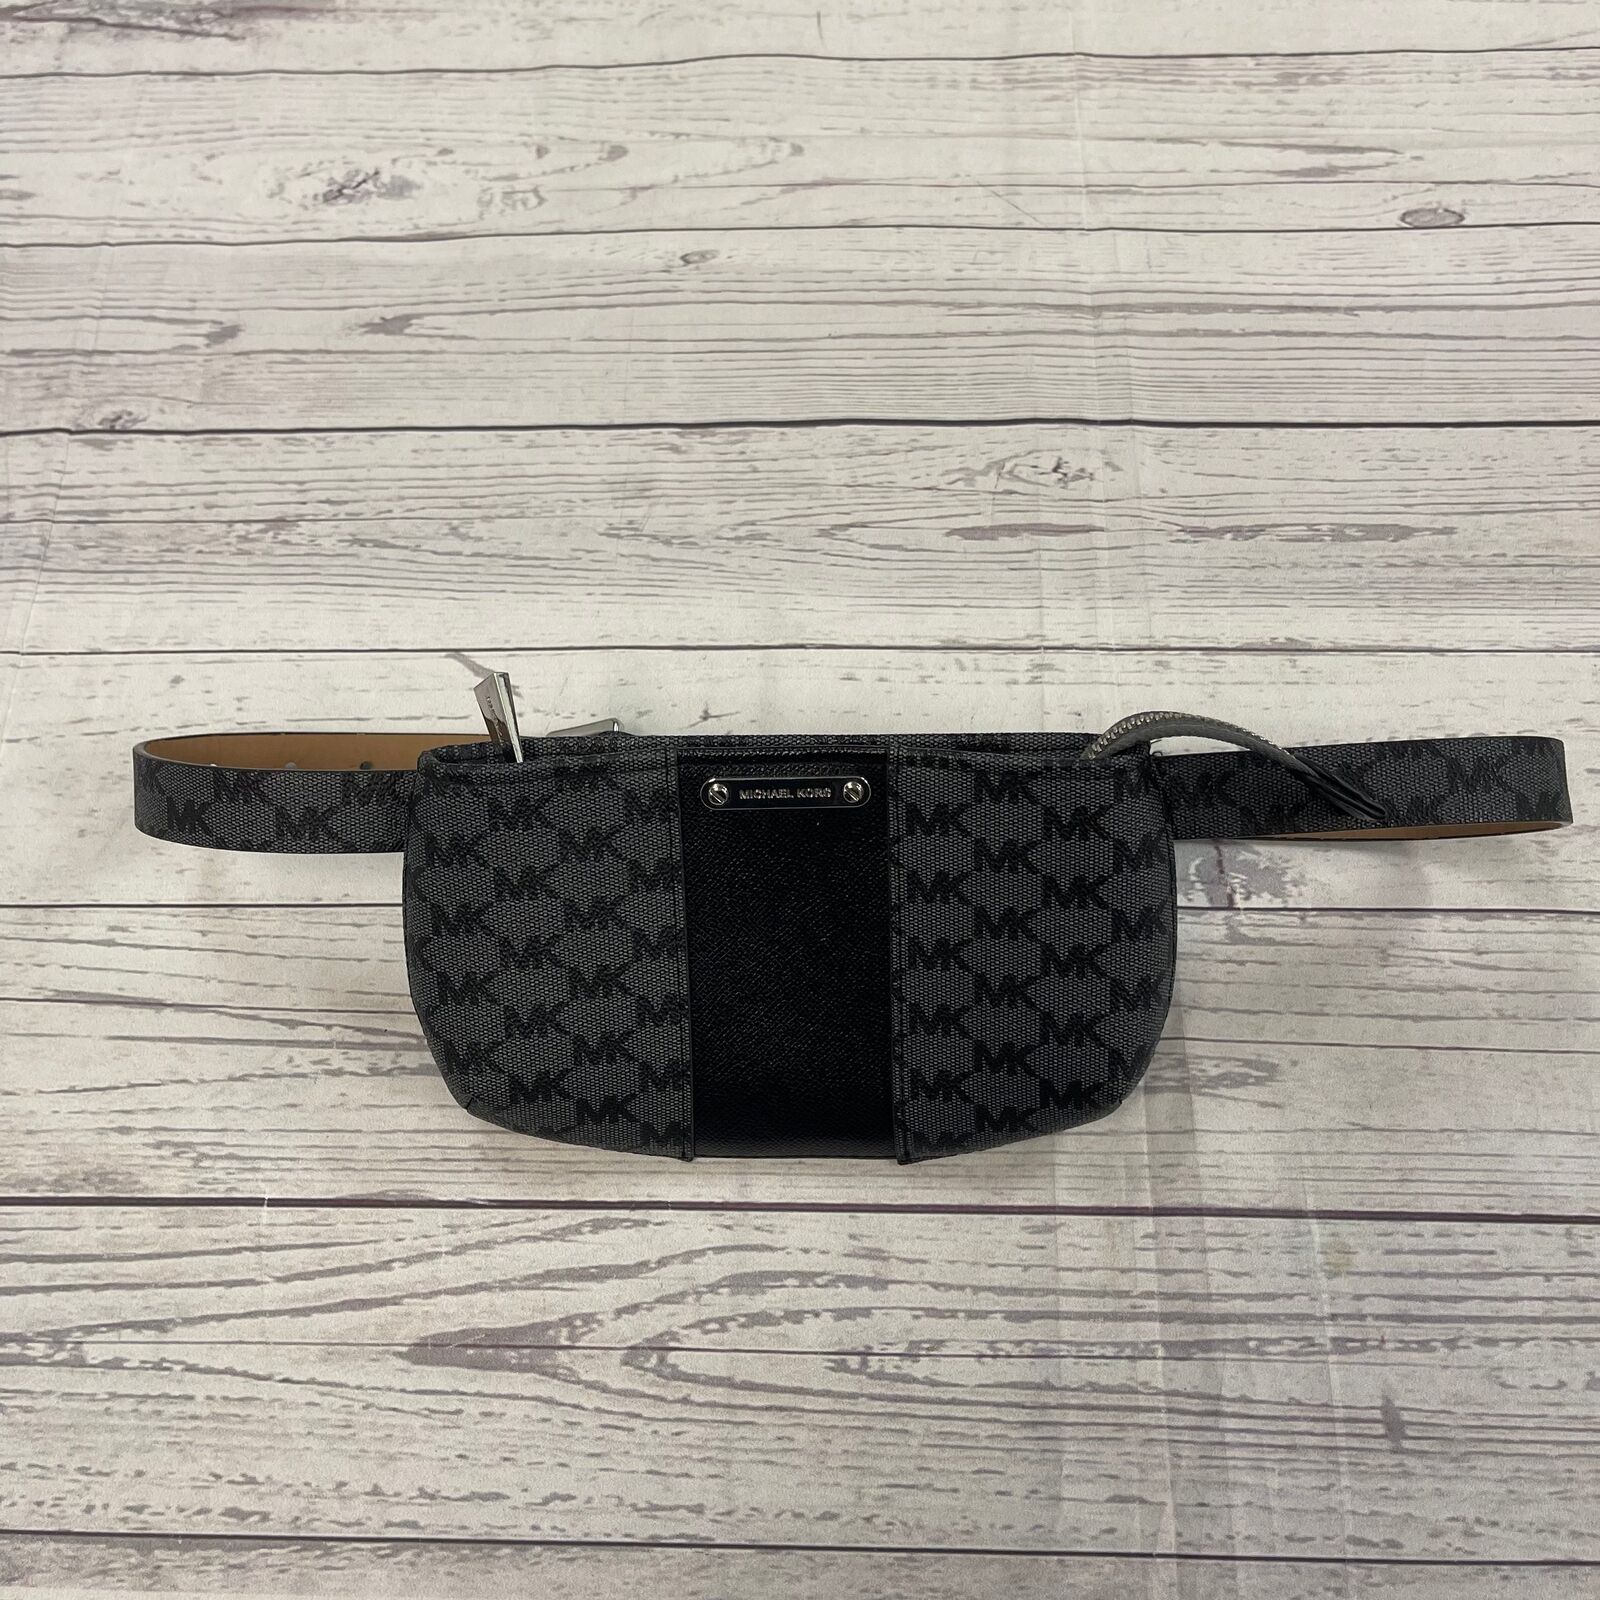 Michael Kors Fanny Pack for Sale in Dallas TX  OfferUp